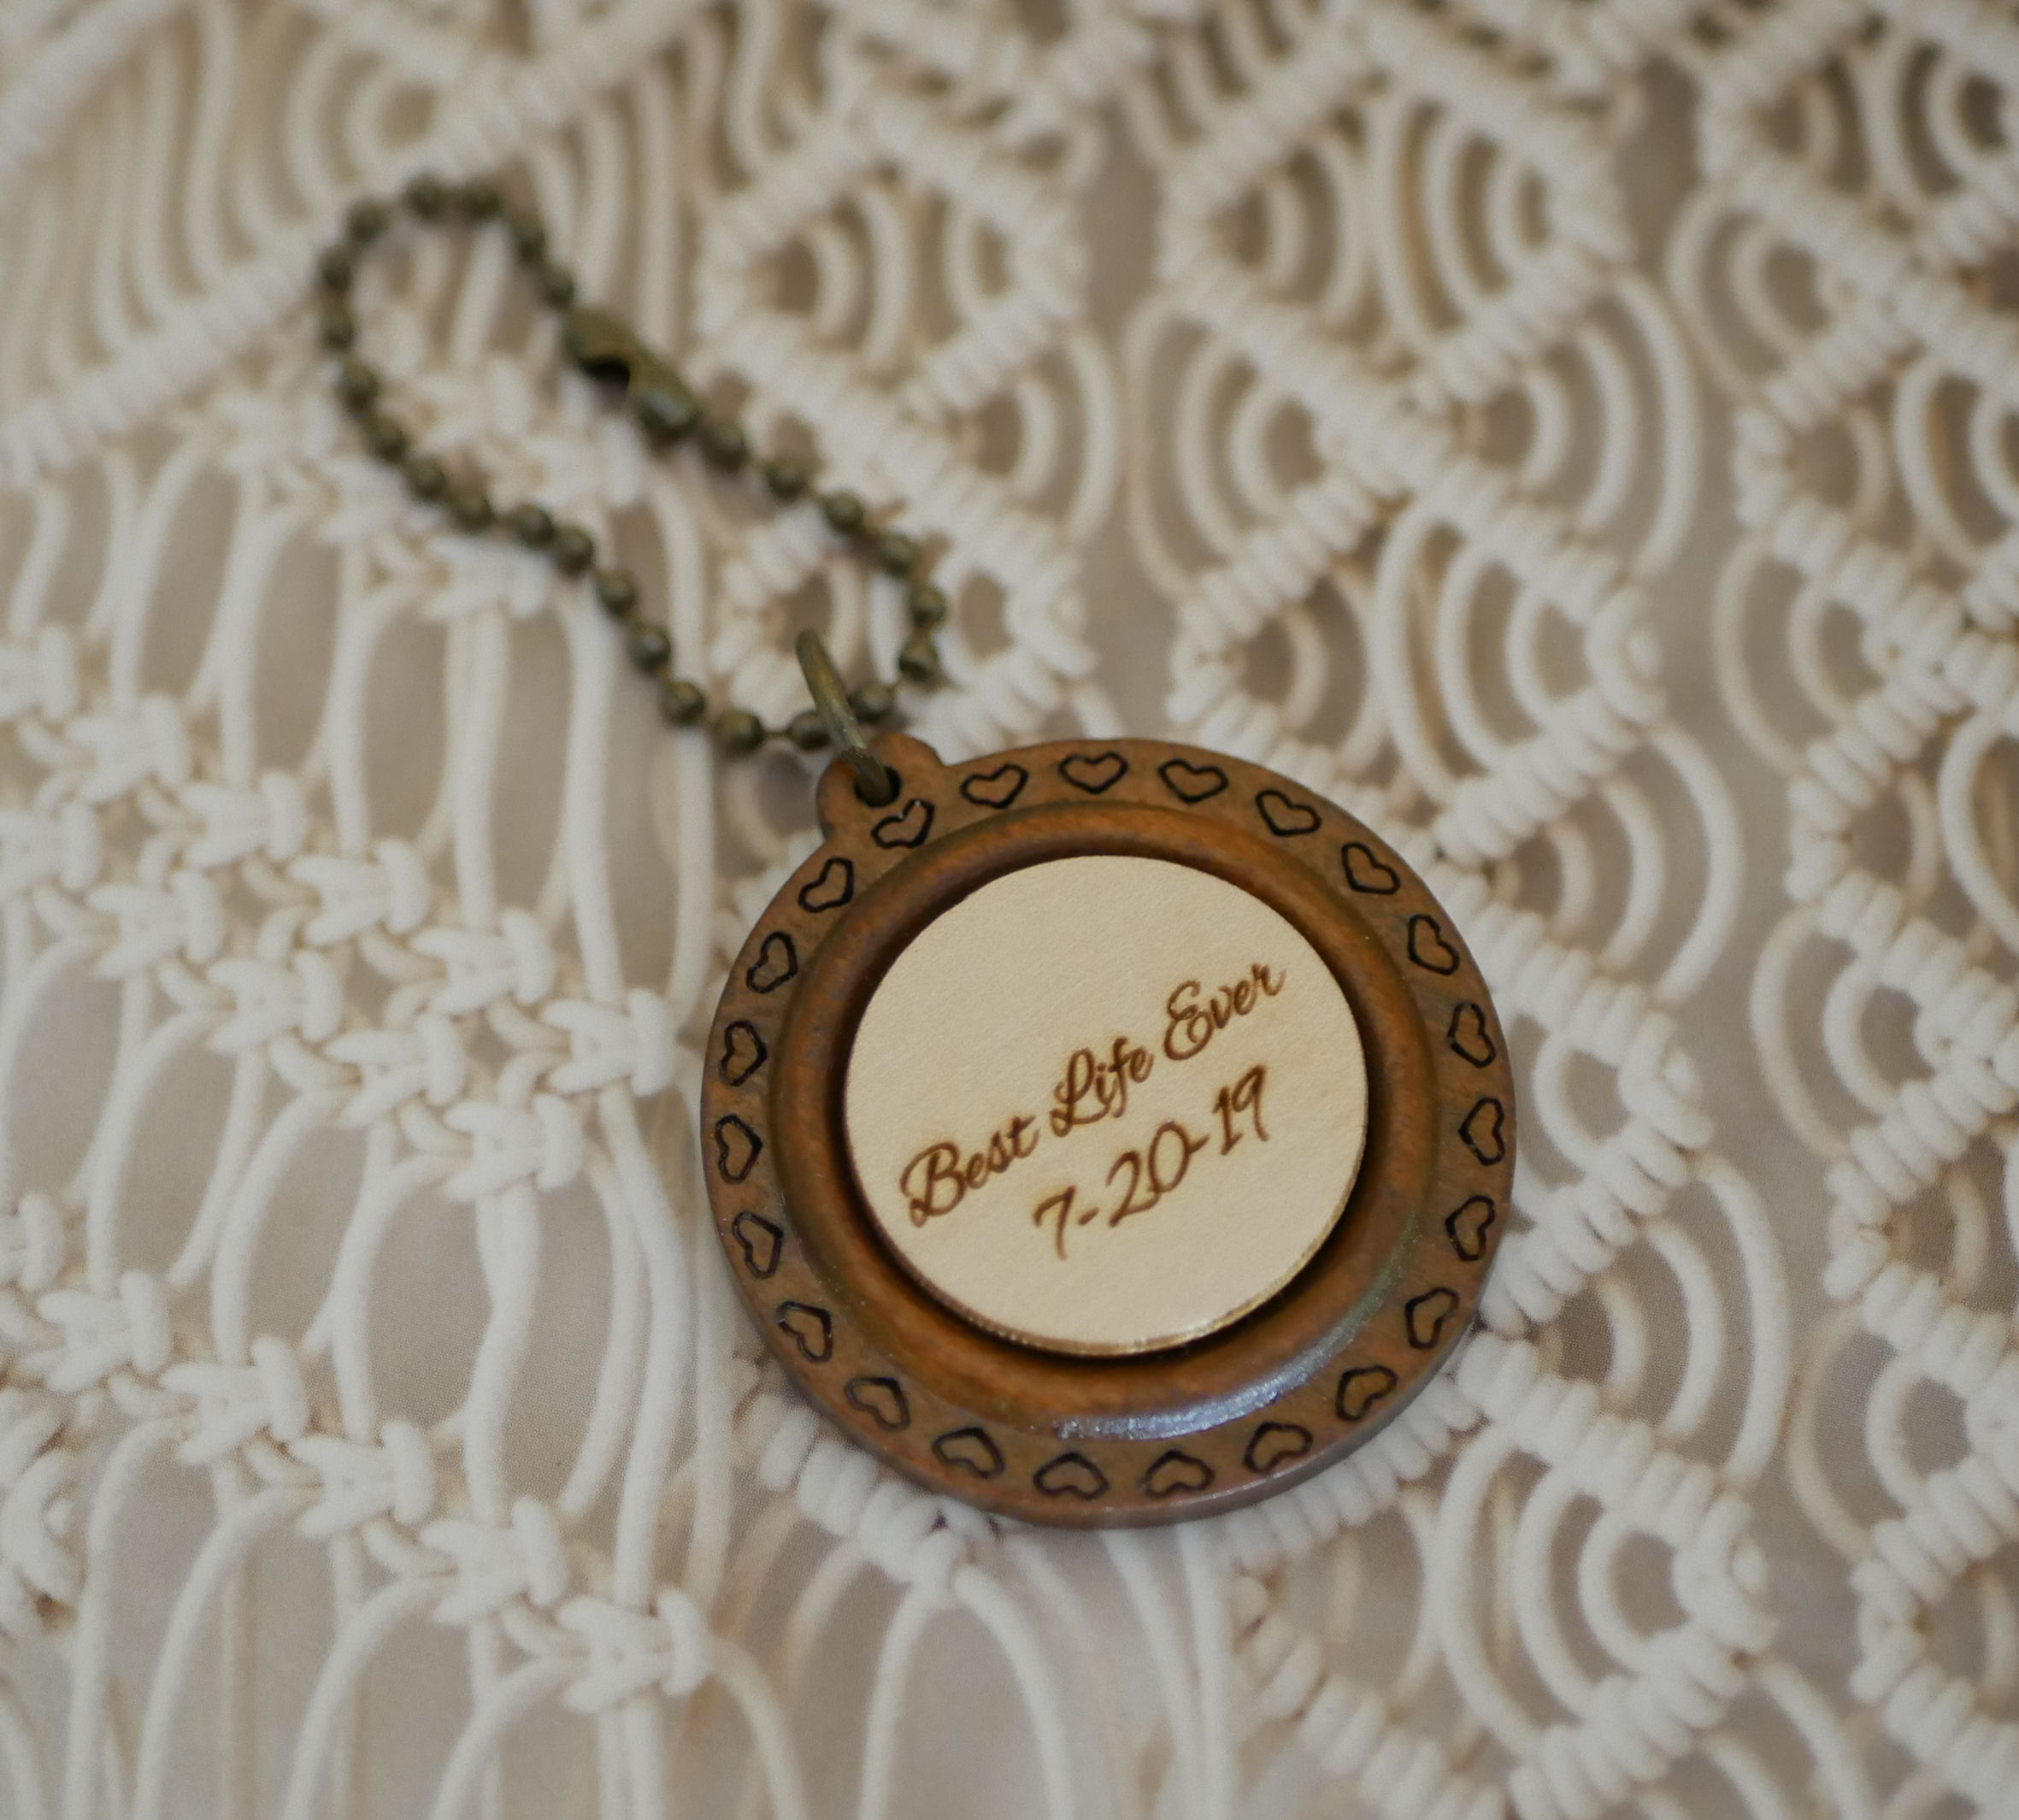 Wooden cabochon key ring on round cherry wood frame to personalize by engraving